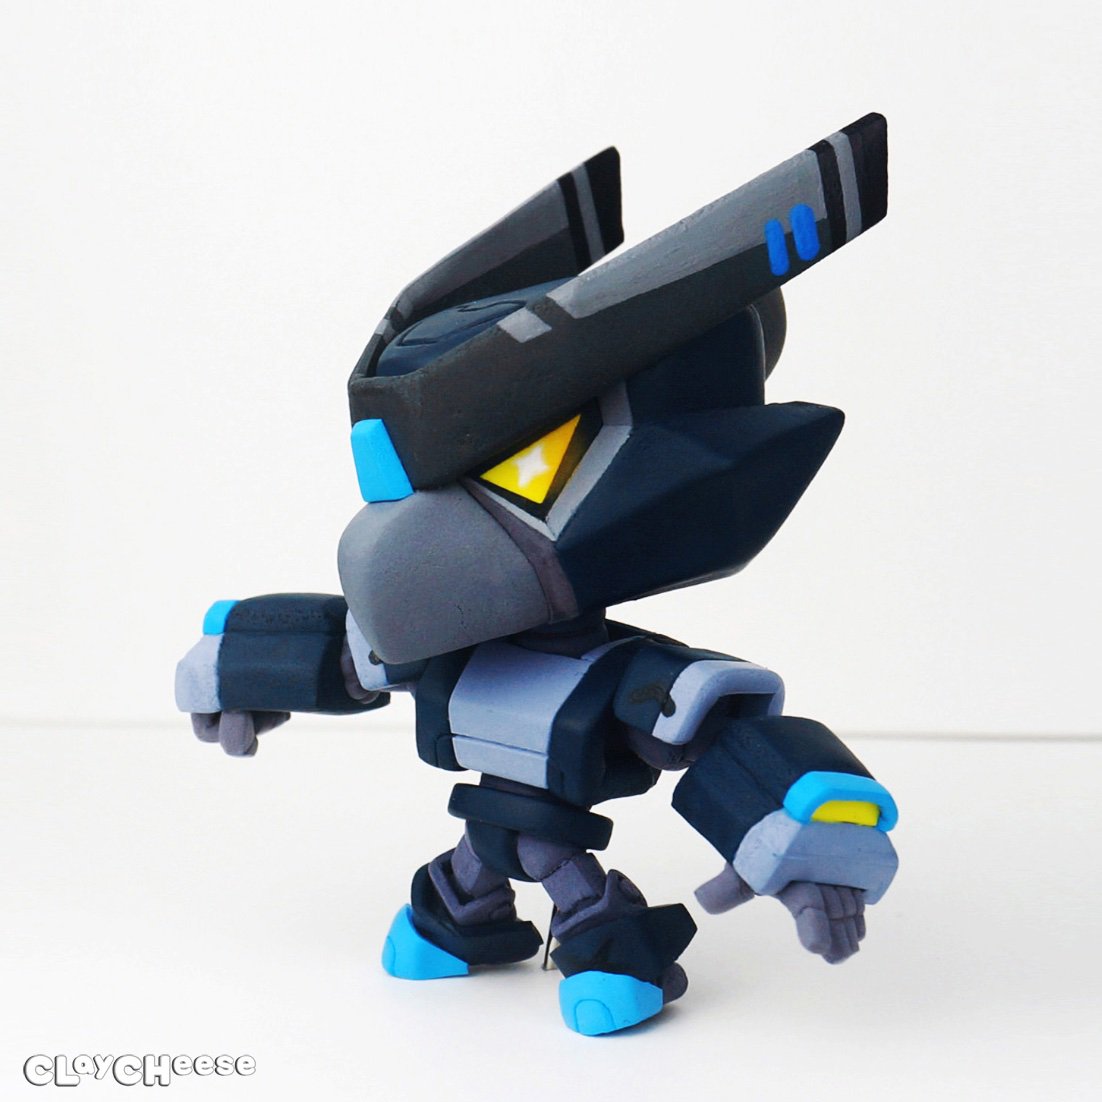 Claycheese 클치 On Twitter Hello It S Claycheese I Made Brawl Stars Night Mecha Crow With Air Dry Clay If You Want You Can See The Making Video Https T Co W3z3nyh5pz Thank You Brawlstarsbibi Brawlstars - krowl robot brawl stars